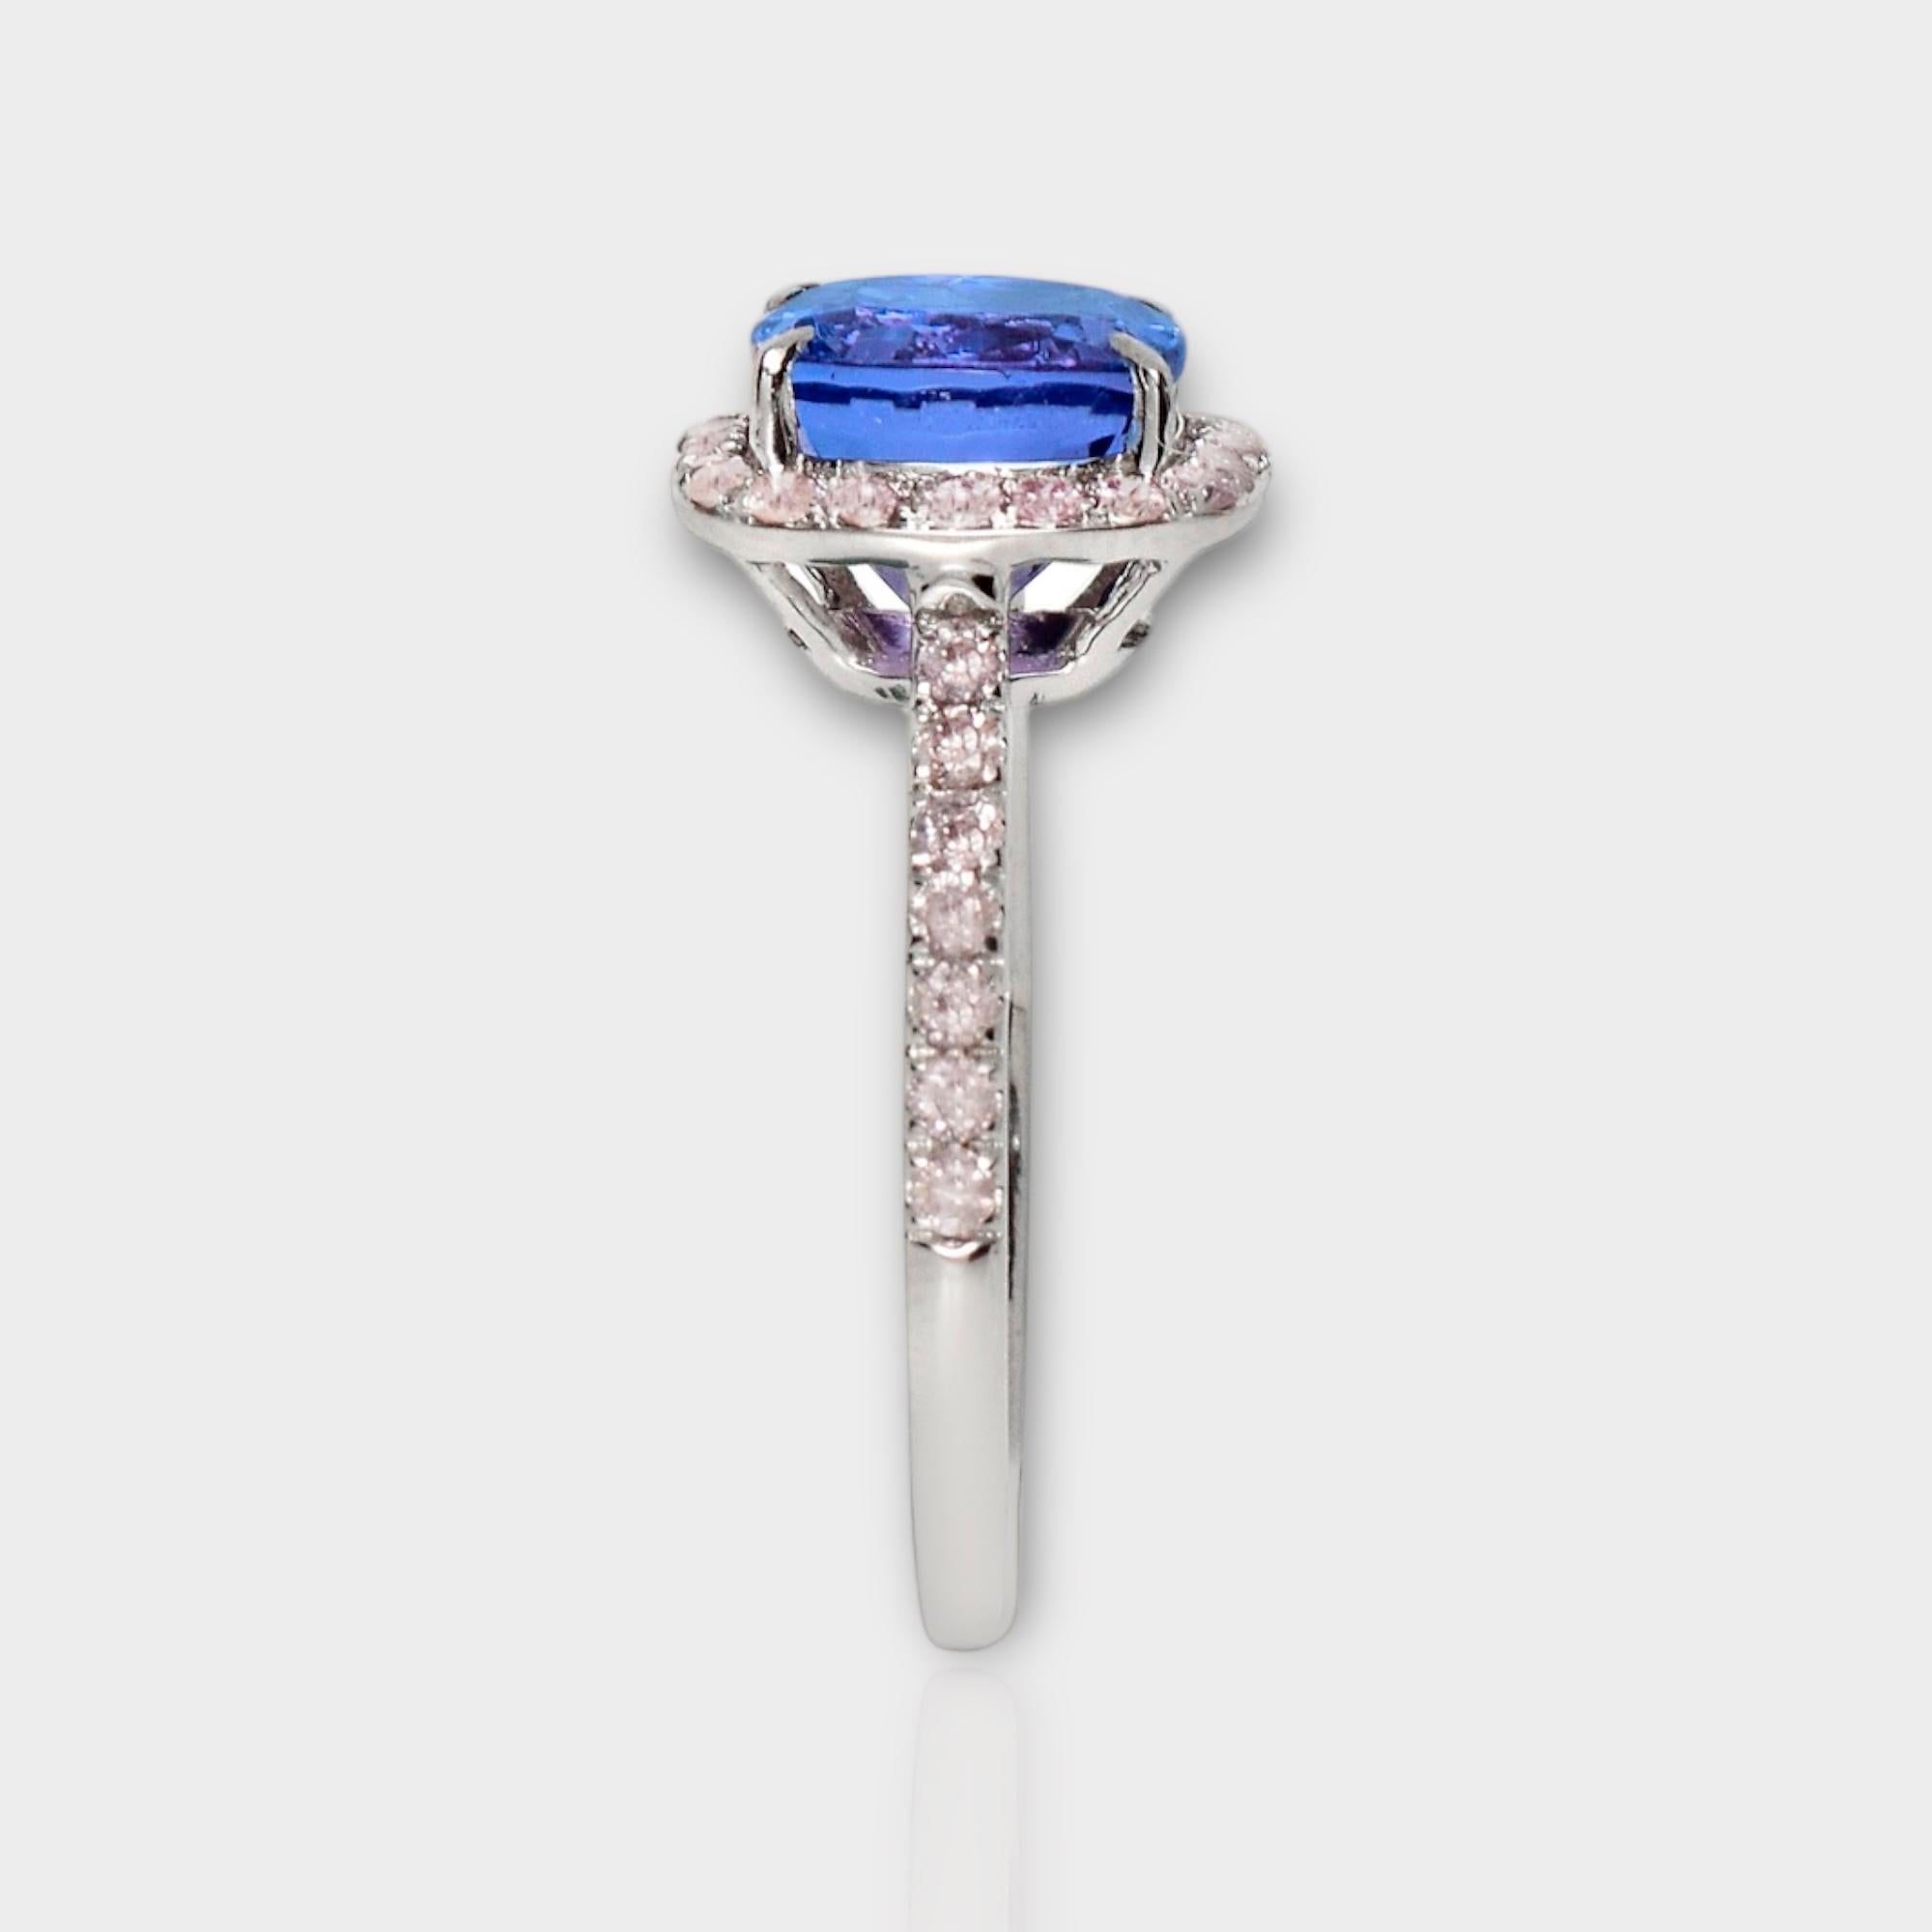 IGI 14K 3.01 ct Tanzanite&Pink Diamond Antique Art Deco Engagement Ring In New Condition For Sale In Kaohsiung City, TW